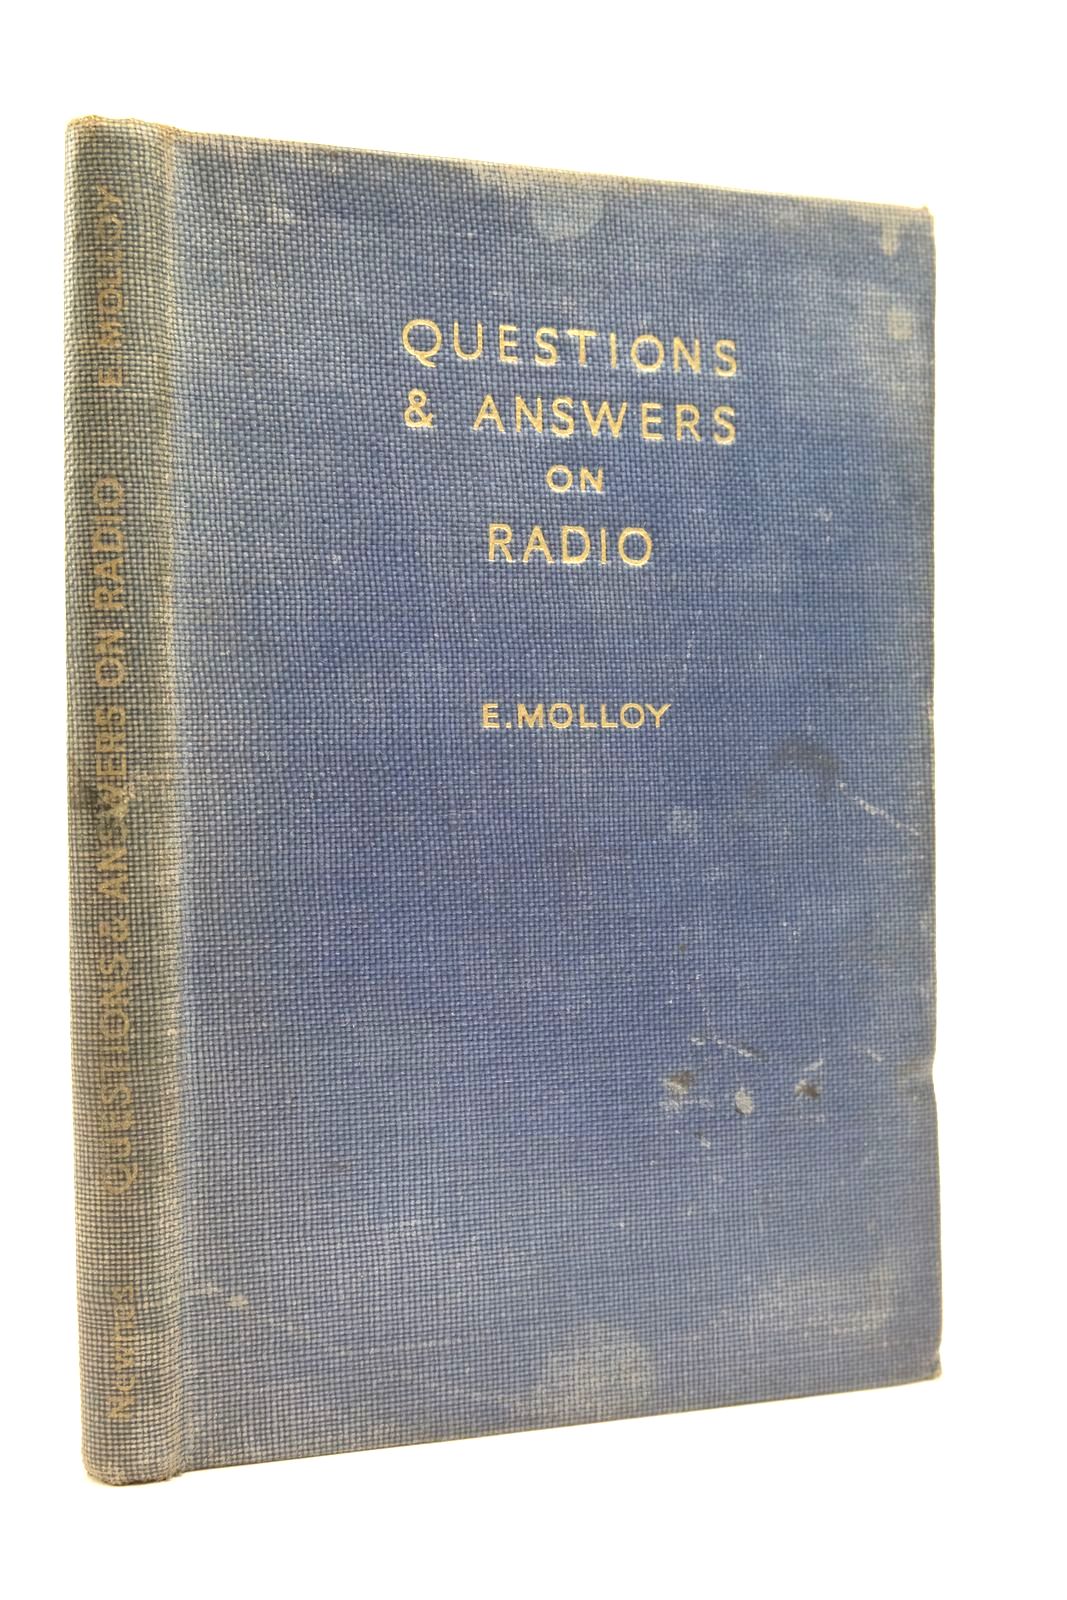 Photo of QUESTIONS AND ANSWERS ON RADIO written by Molloy, E. published by George Newnes Limited (STOCK CODE: 2140308)  for sale by Stella & Rose's Books